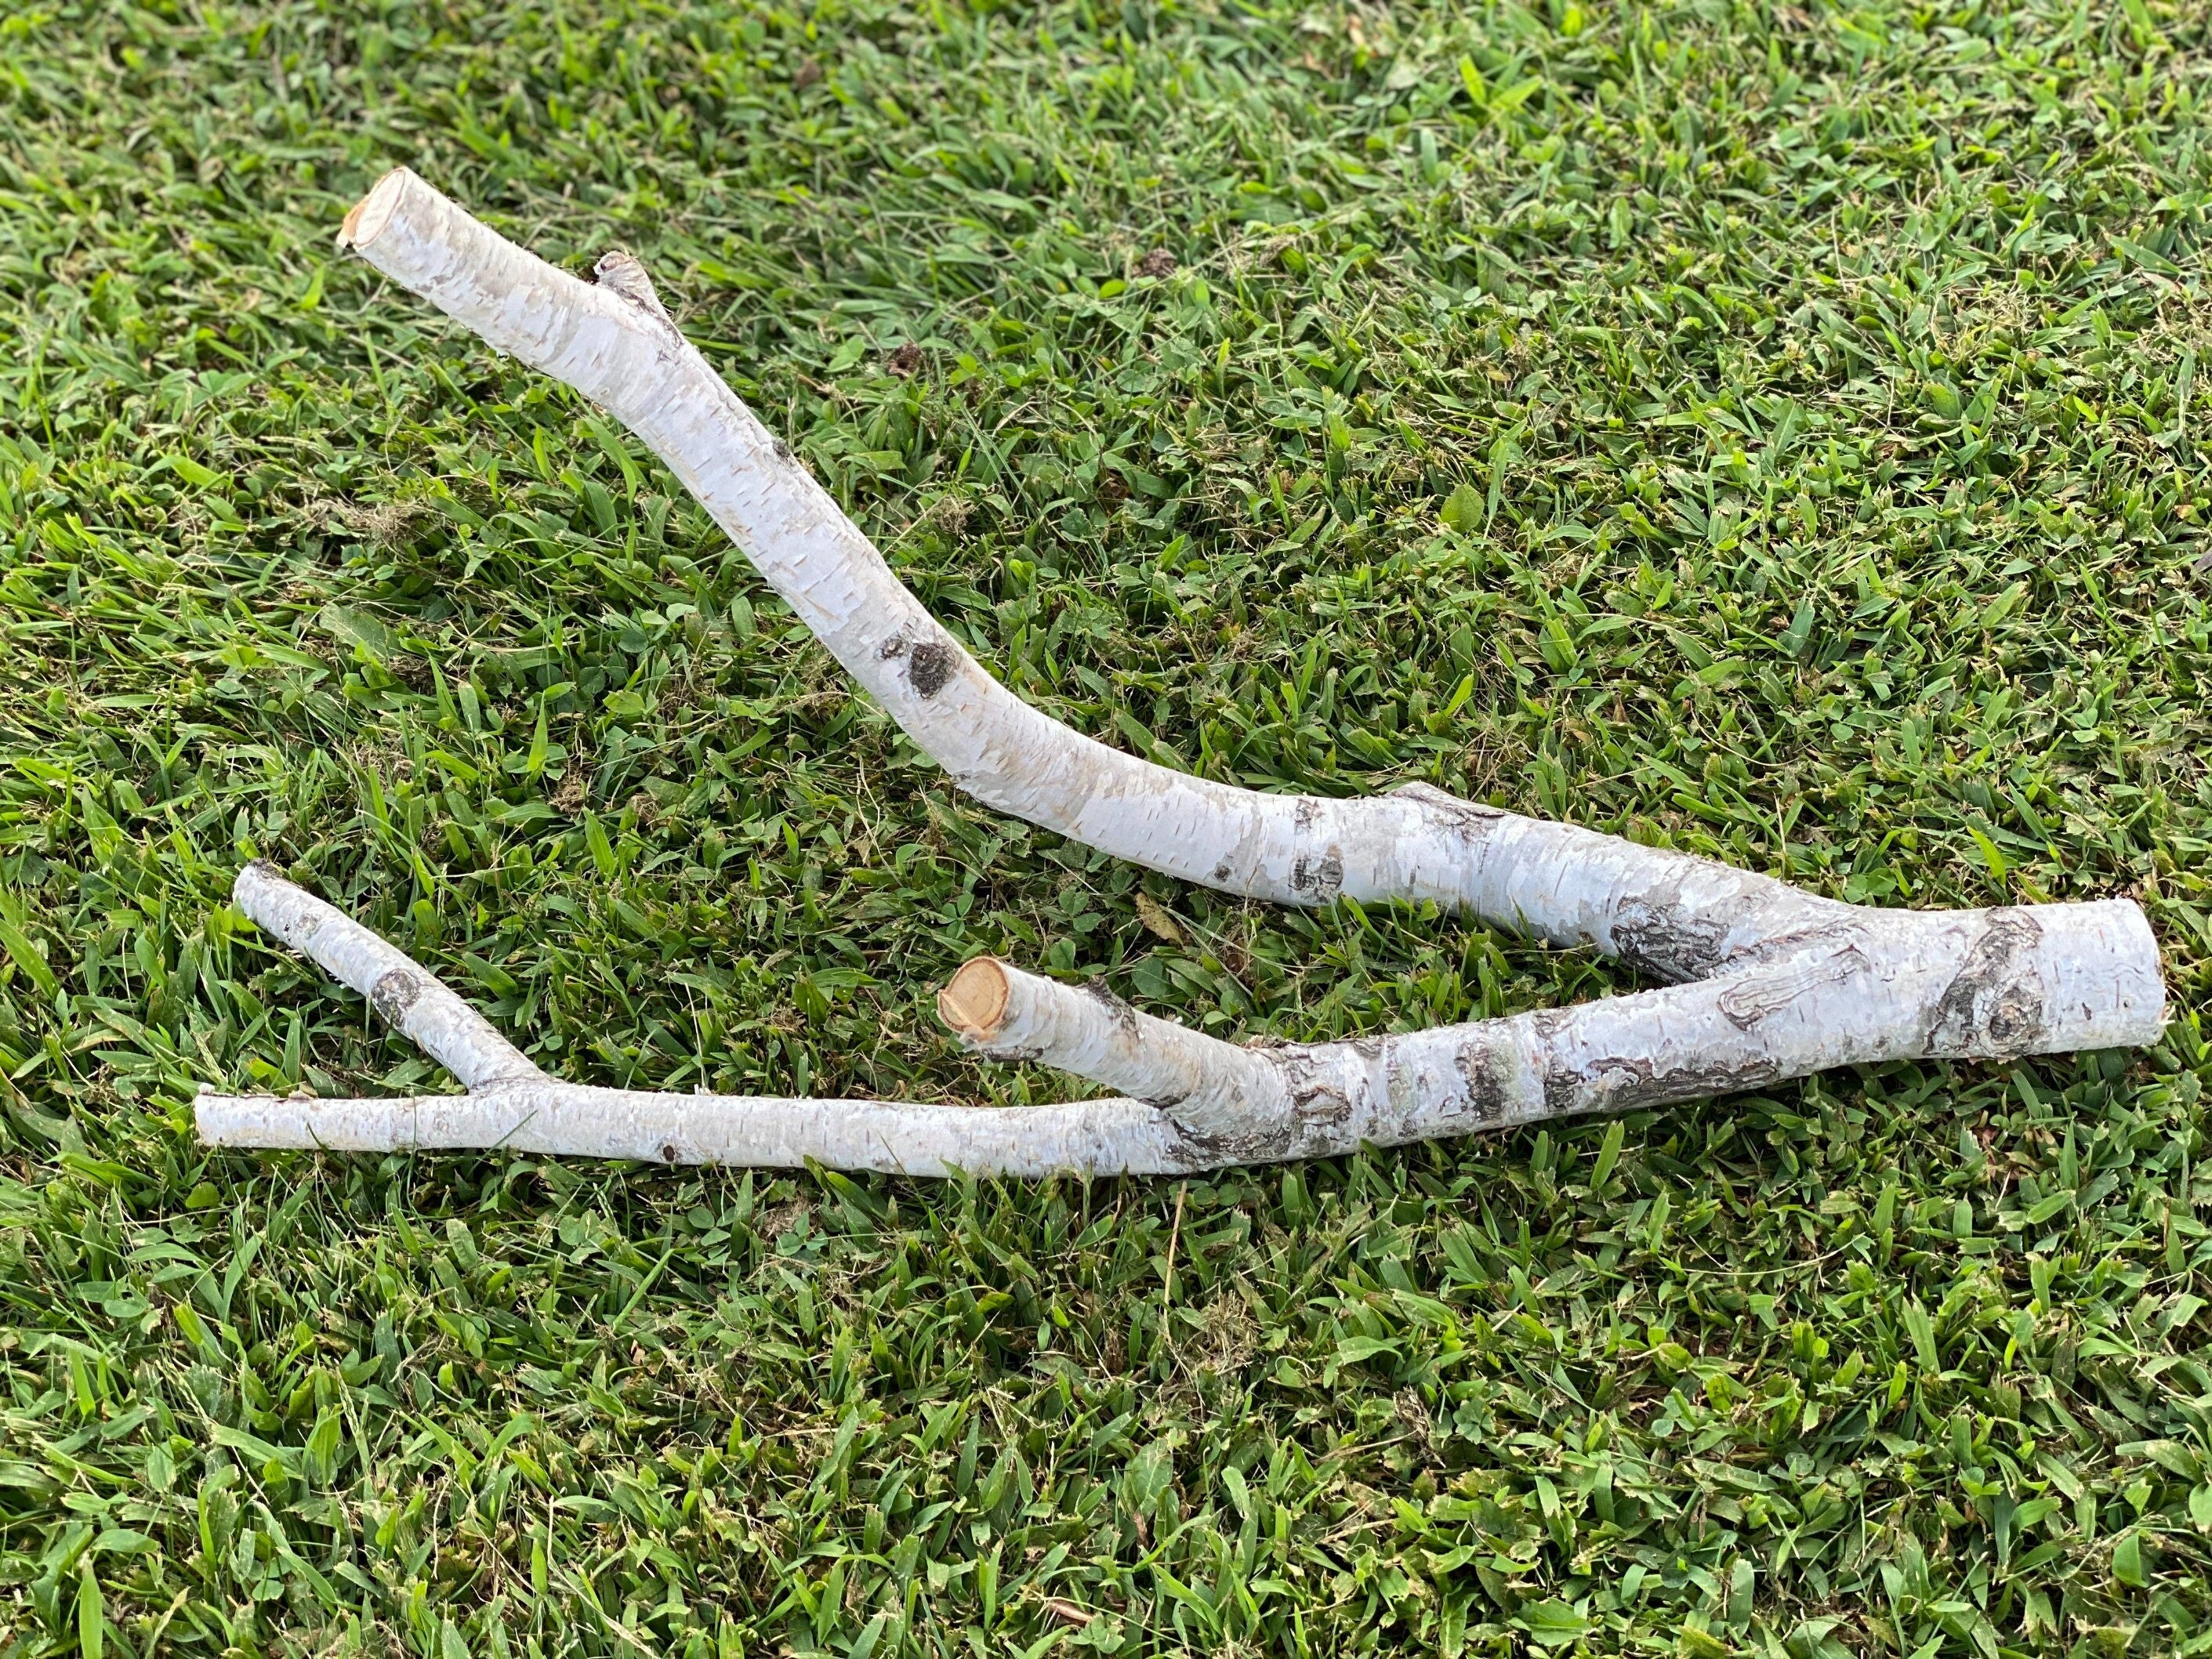 White Birch Branch, Parrot Perch, Approximately 21 Inches Long by 6 Inches Wide and 10 Inches Tall Branch to Branch